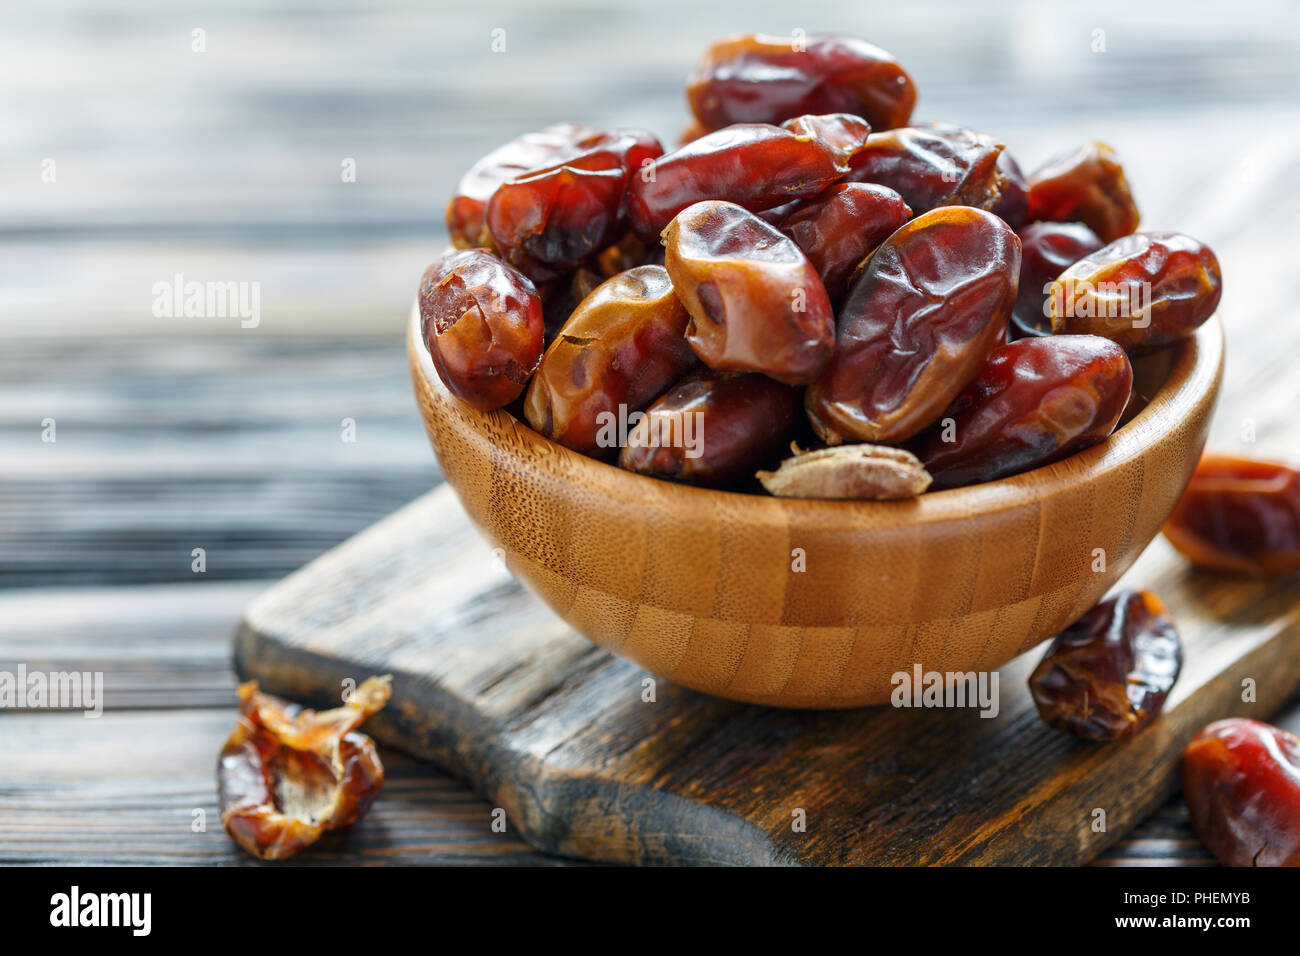 Dried date fruit in a wooden bowl. Stock Photo